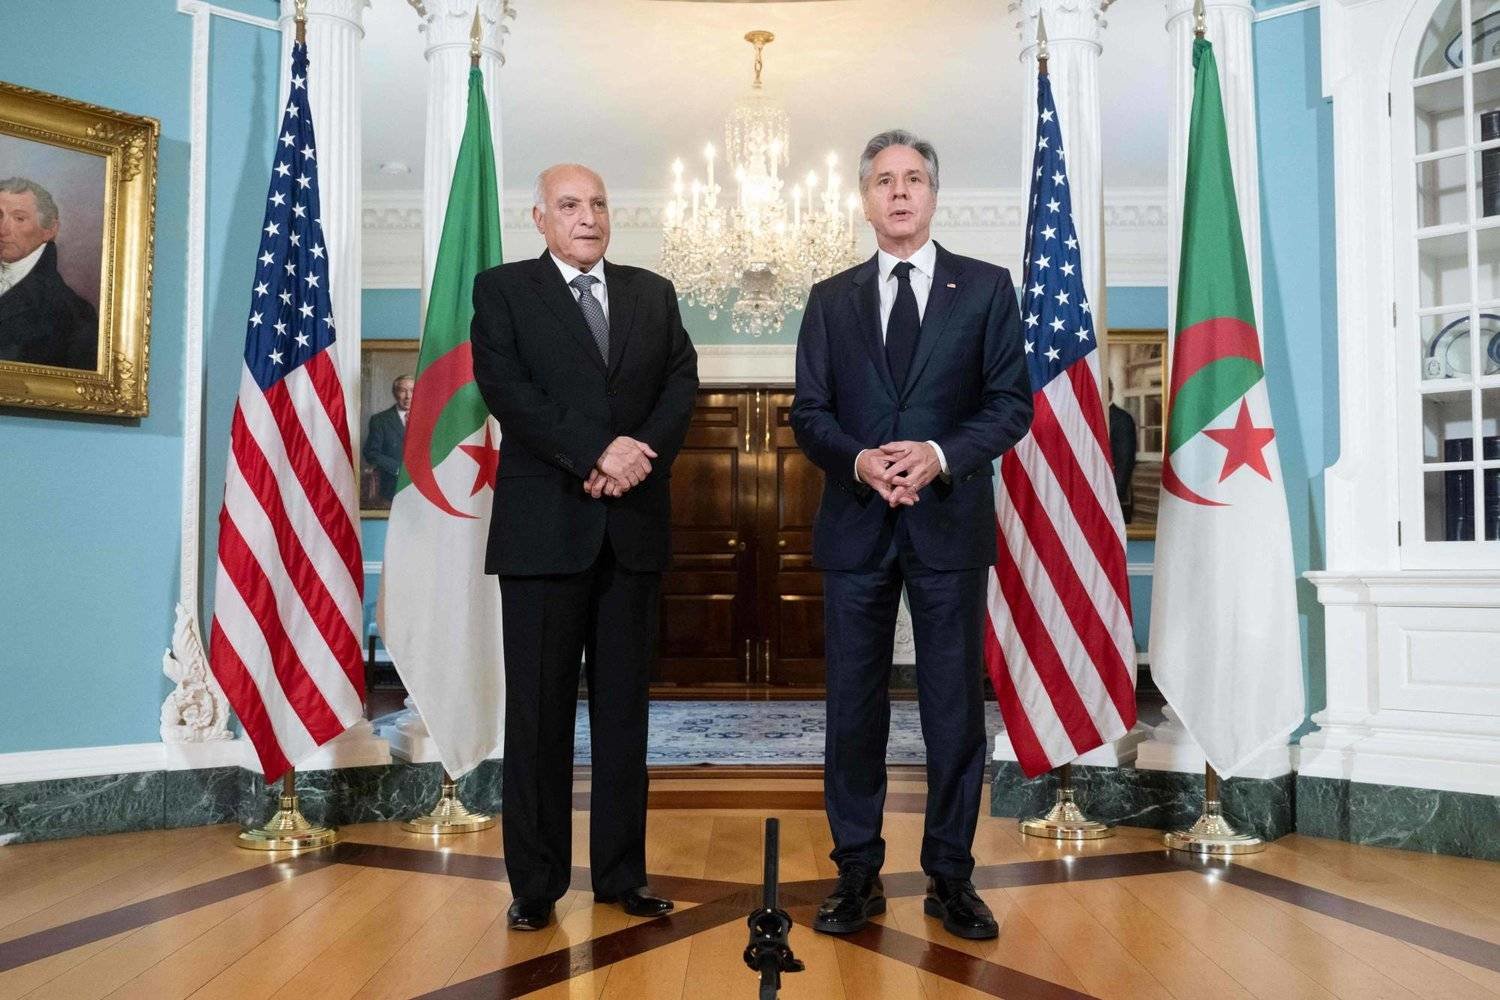 Algeria’s attempts to balance relations between East and West